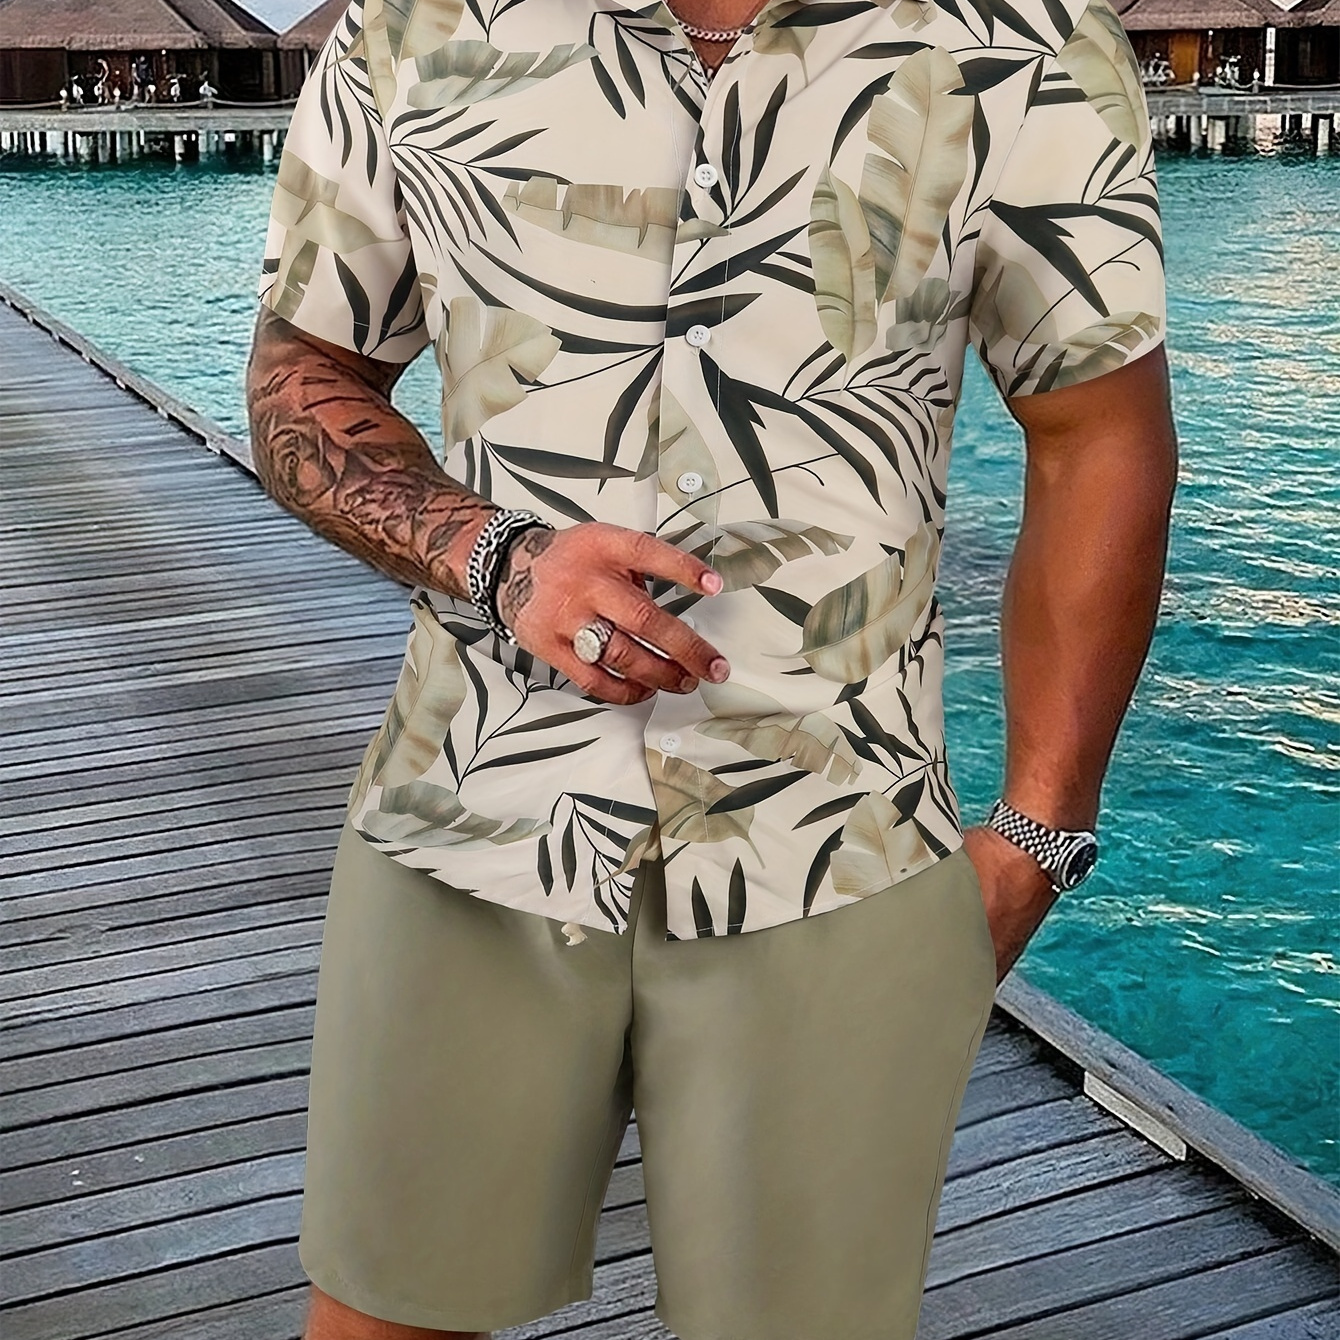 

Men's Tropical Floral Pattern Print Lapel Shirt With Short Sleeve And Button Down Placket, Casual And Trendy Tops For Men, Suitable For Summer Leisurewear And Beach Vacation